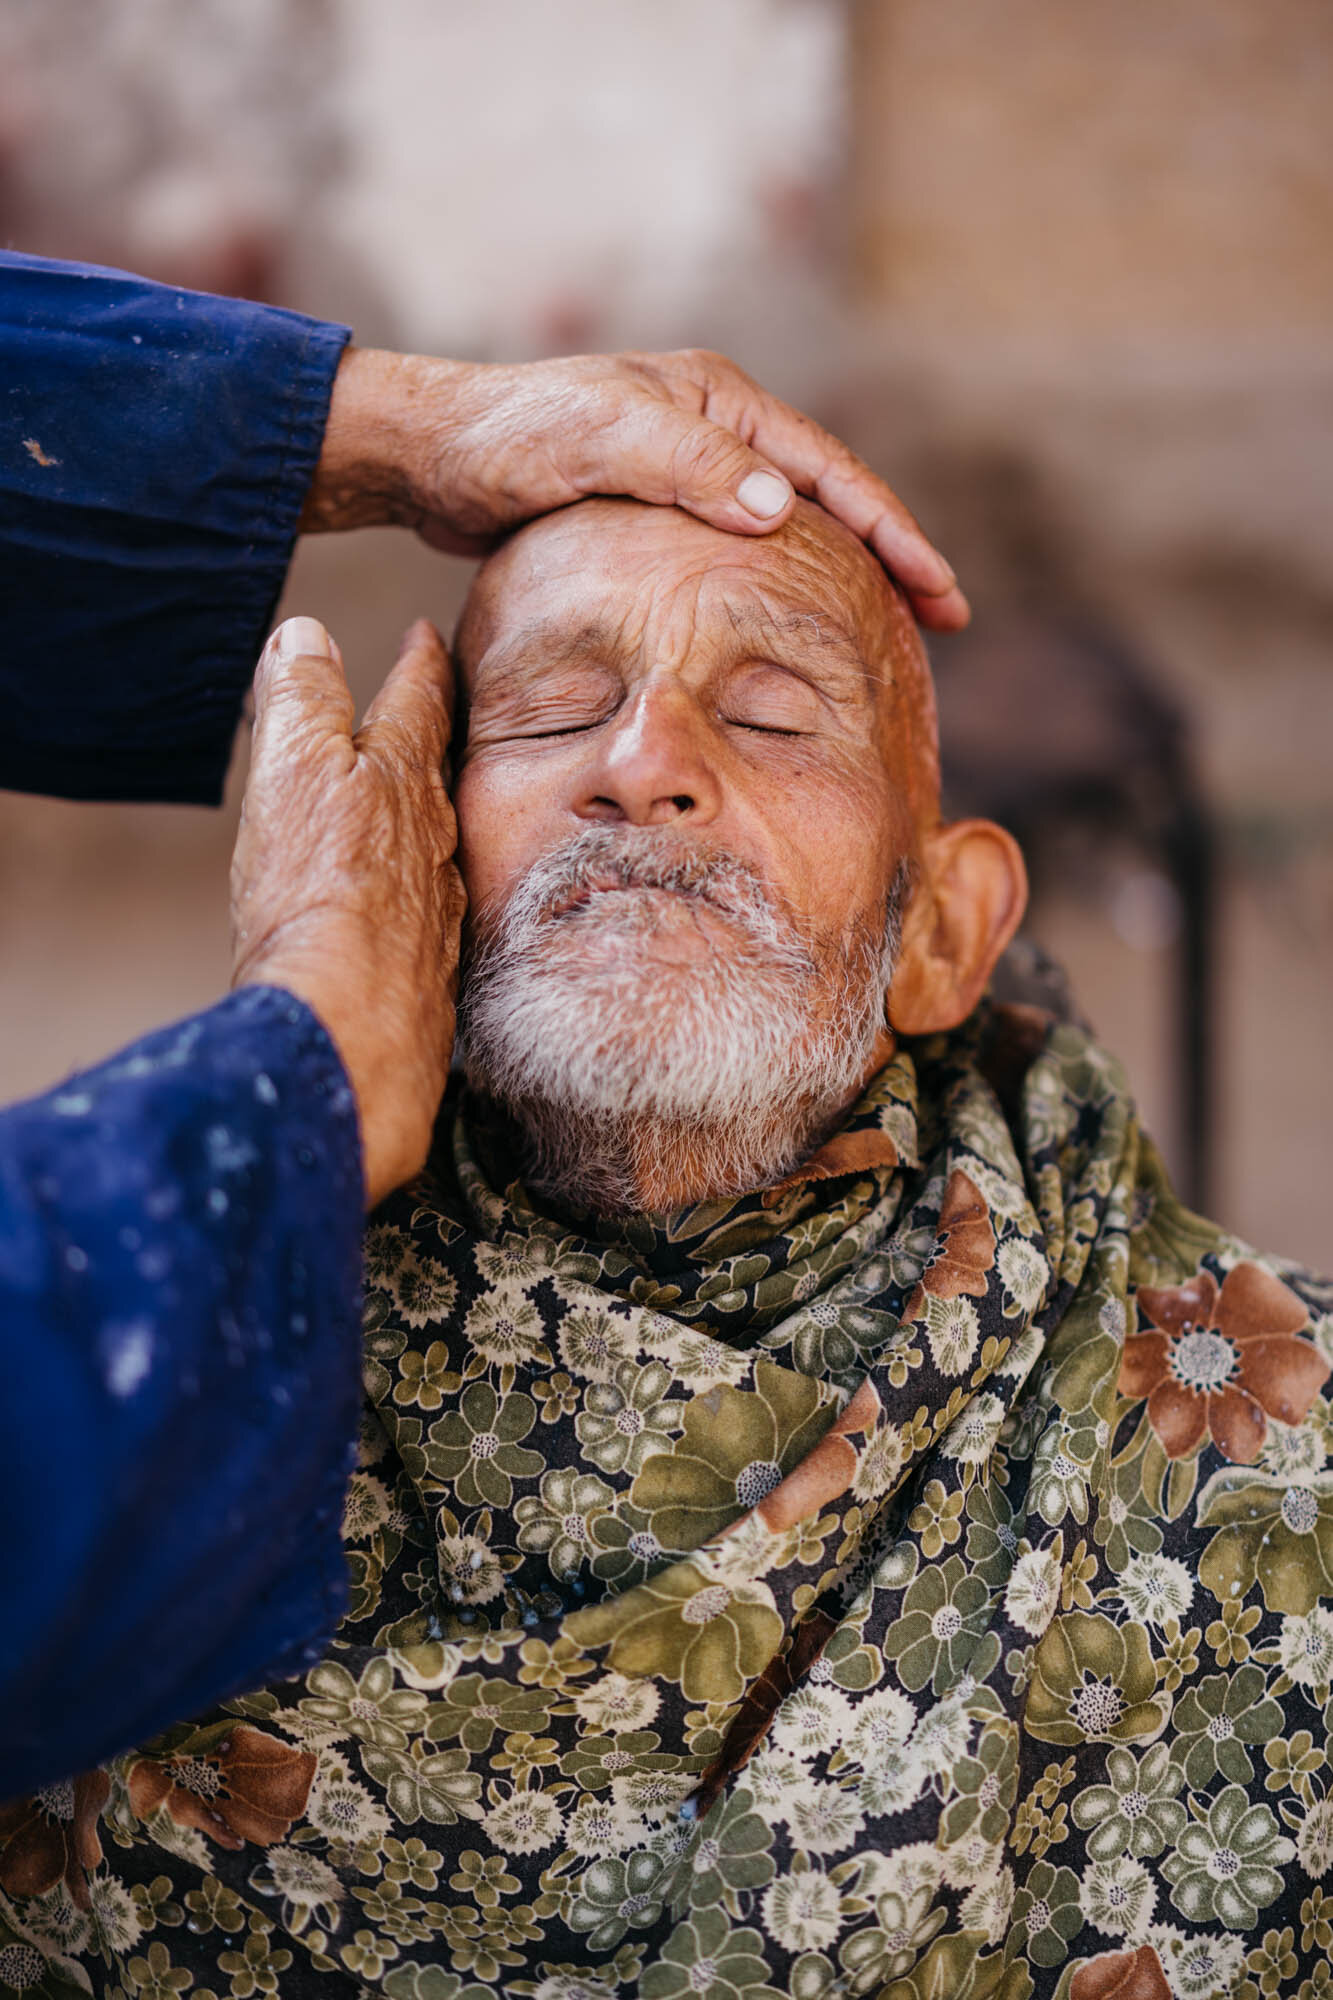  A barber giving face massage at the bazaar 